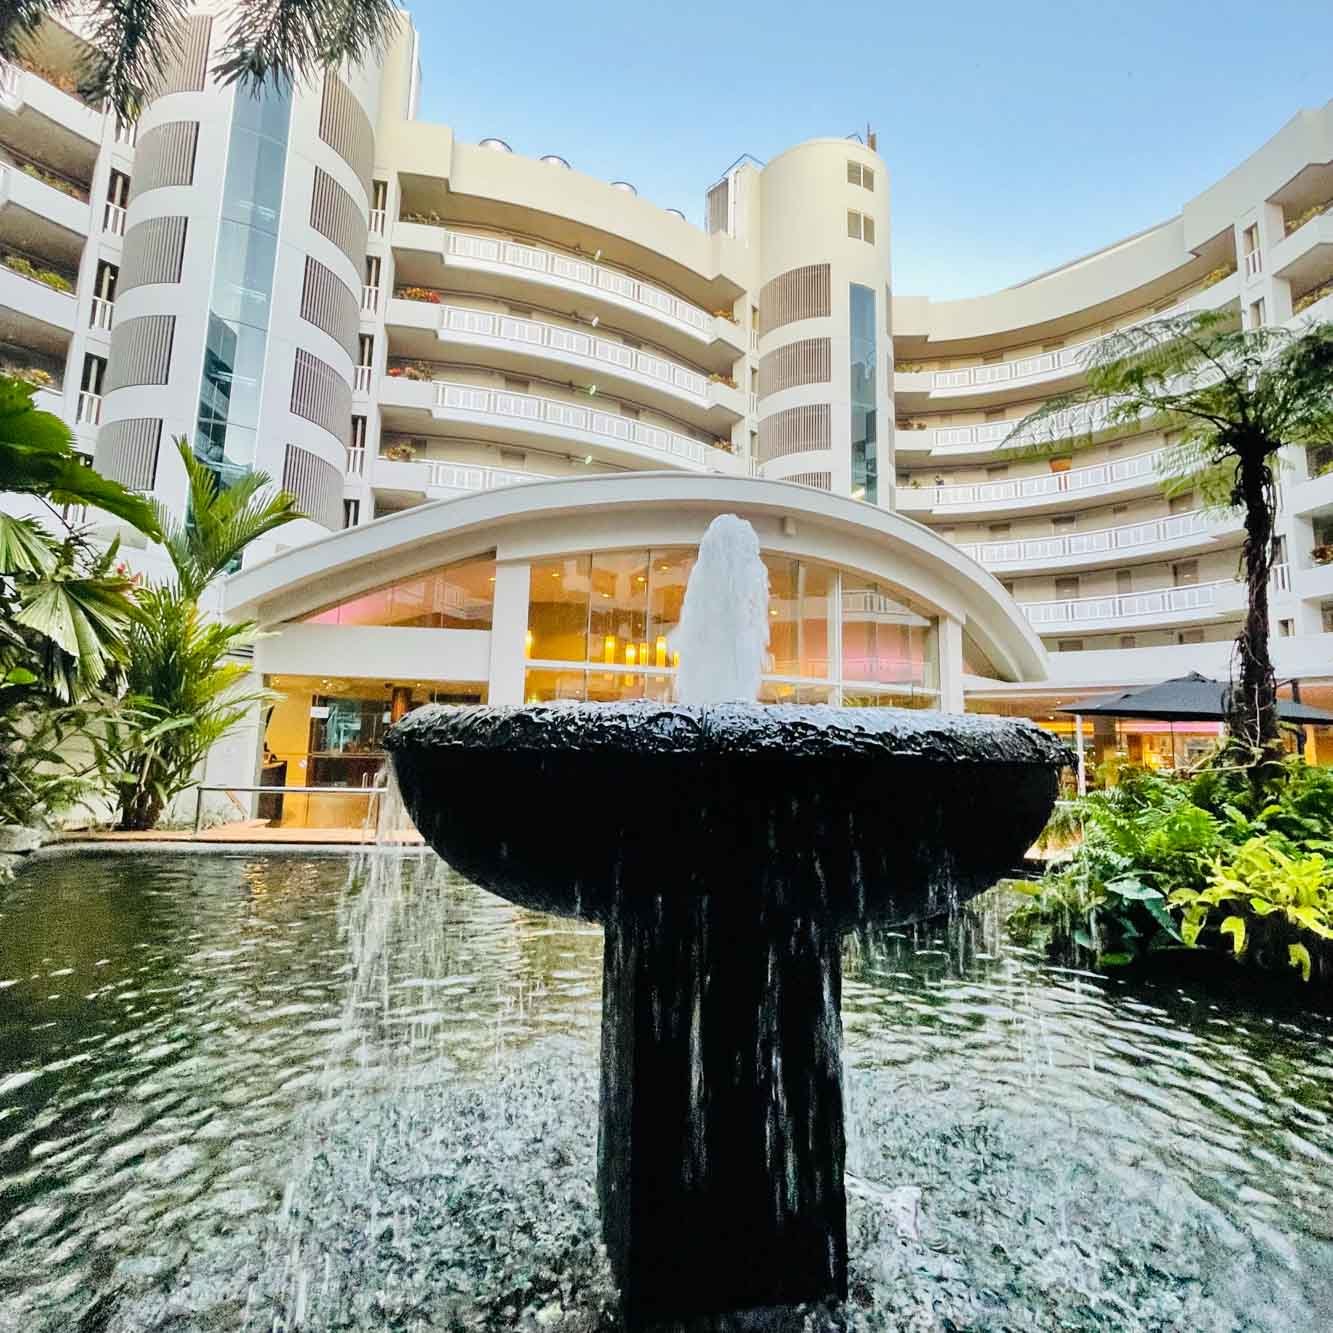 Fountains are a feature at DoubleTree Cairns